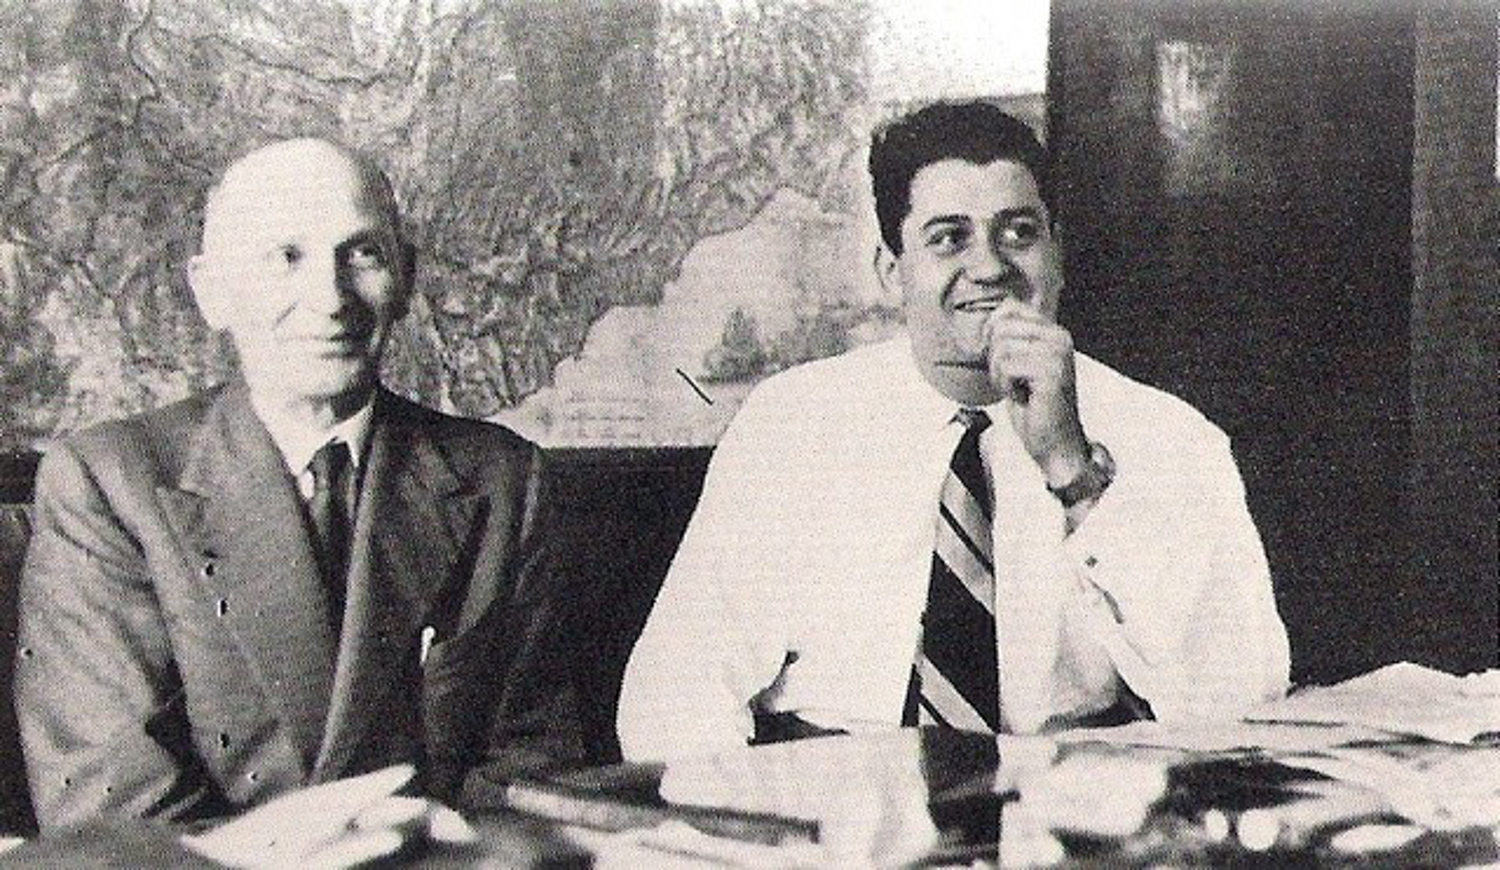 After Vincenzo's death, his son Gianni Lancia took over the company. He was joined by Vittorio Jano, recentlly releaced by Afla Romeo. 